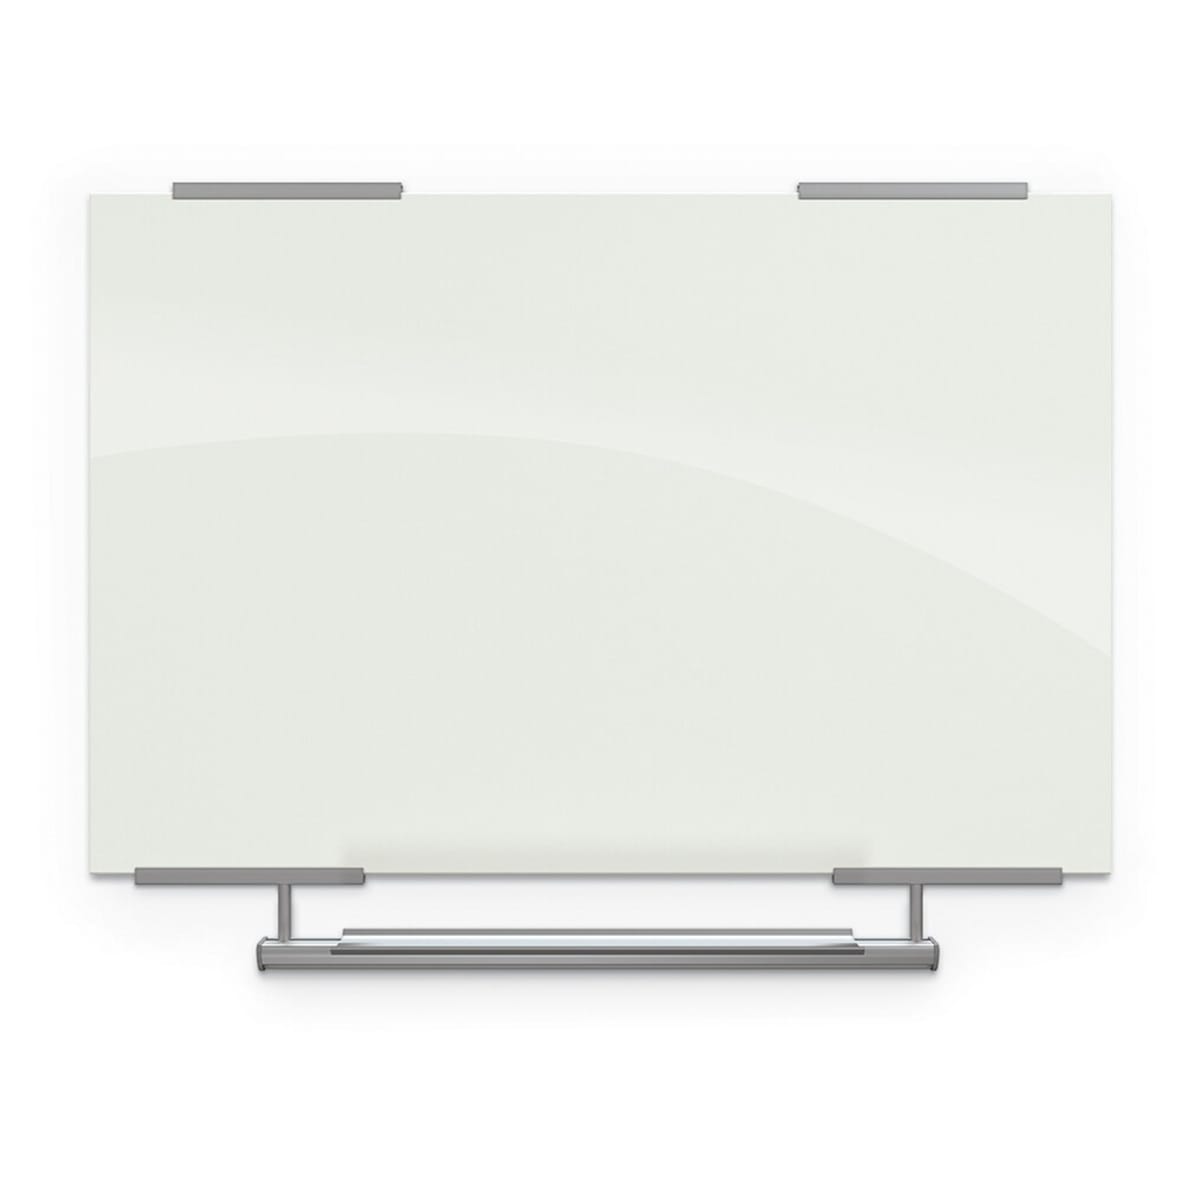 Mooreco 6'W X 4'H - Visionary Magnetic Glass Dry Erase Whiteboard with Exo Tray System - Glossy White (Mooreco 83845-2X576) - SchoolOutlet